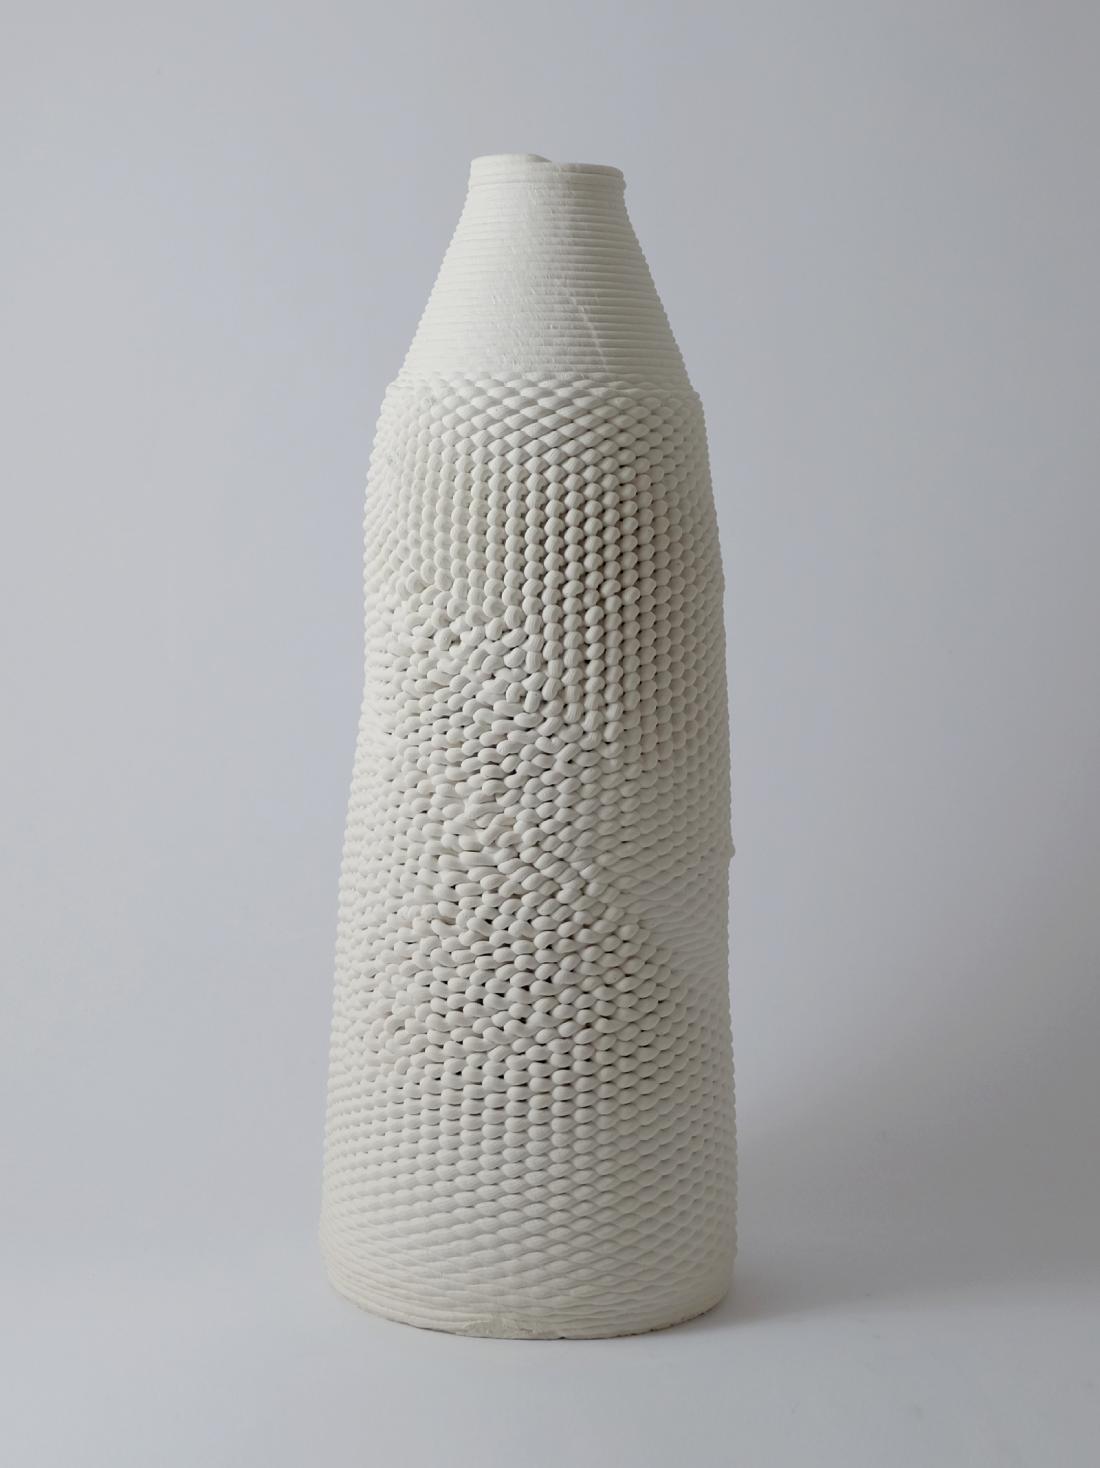 The second piece, also made of printed porcelain. It is shaped like a round beaker, with the top slightly thinner than the base, and a knitted-like texture.